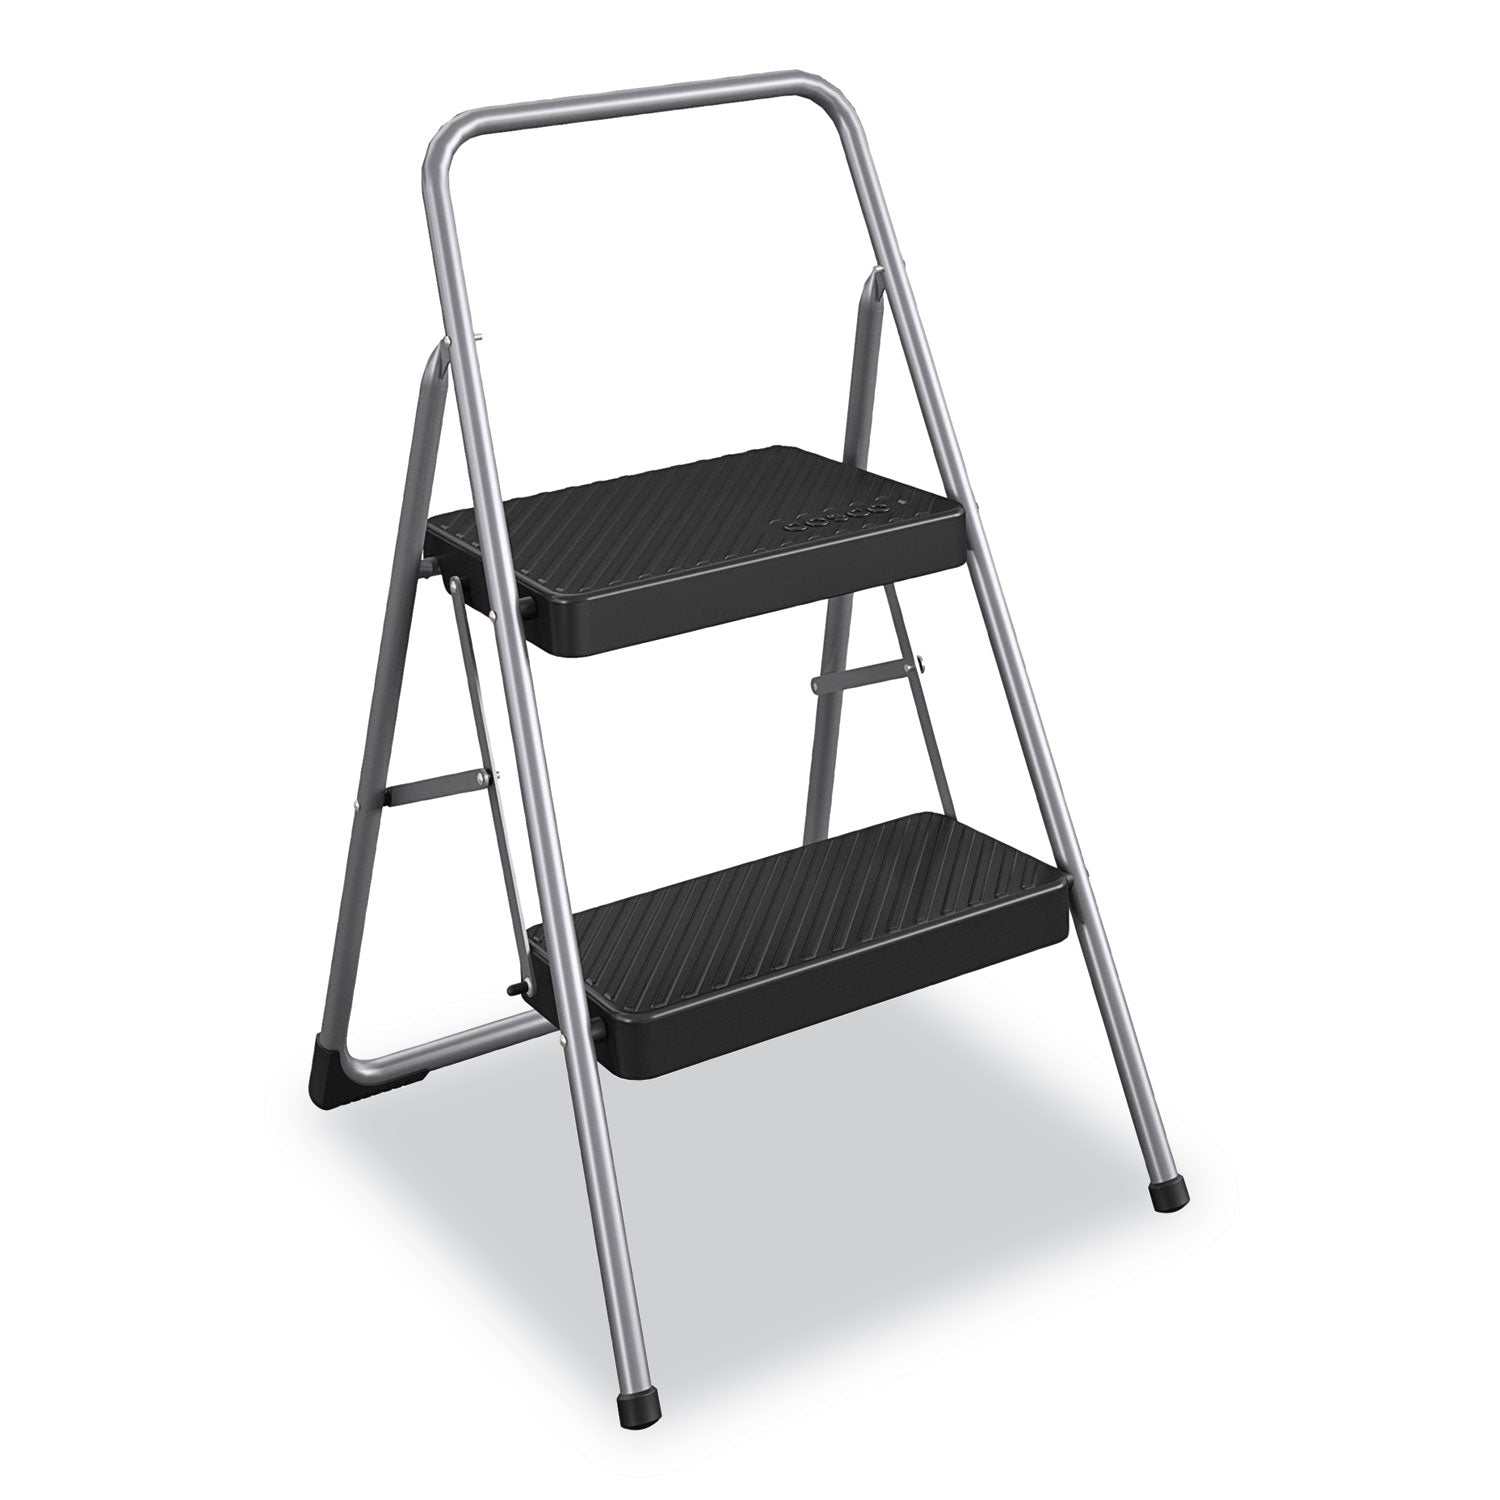 2-step-folding-steel-step-stool-200-lb-capacity-2813-working-height-cool-gray_csc11137pbl1e - 1